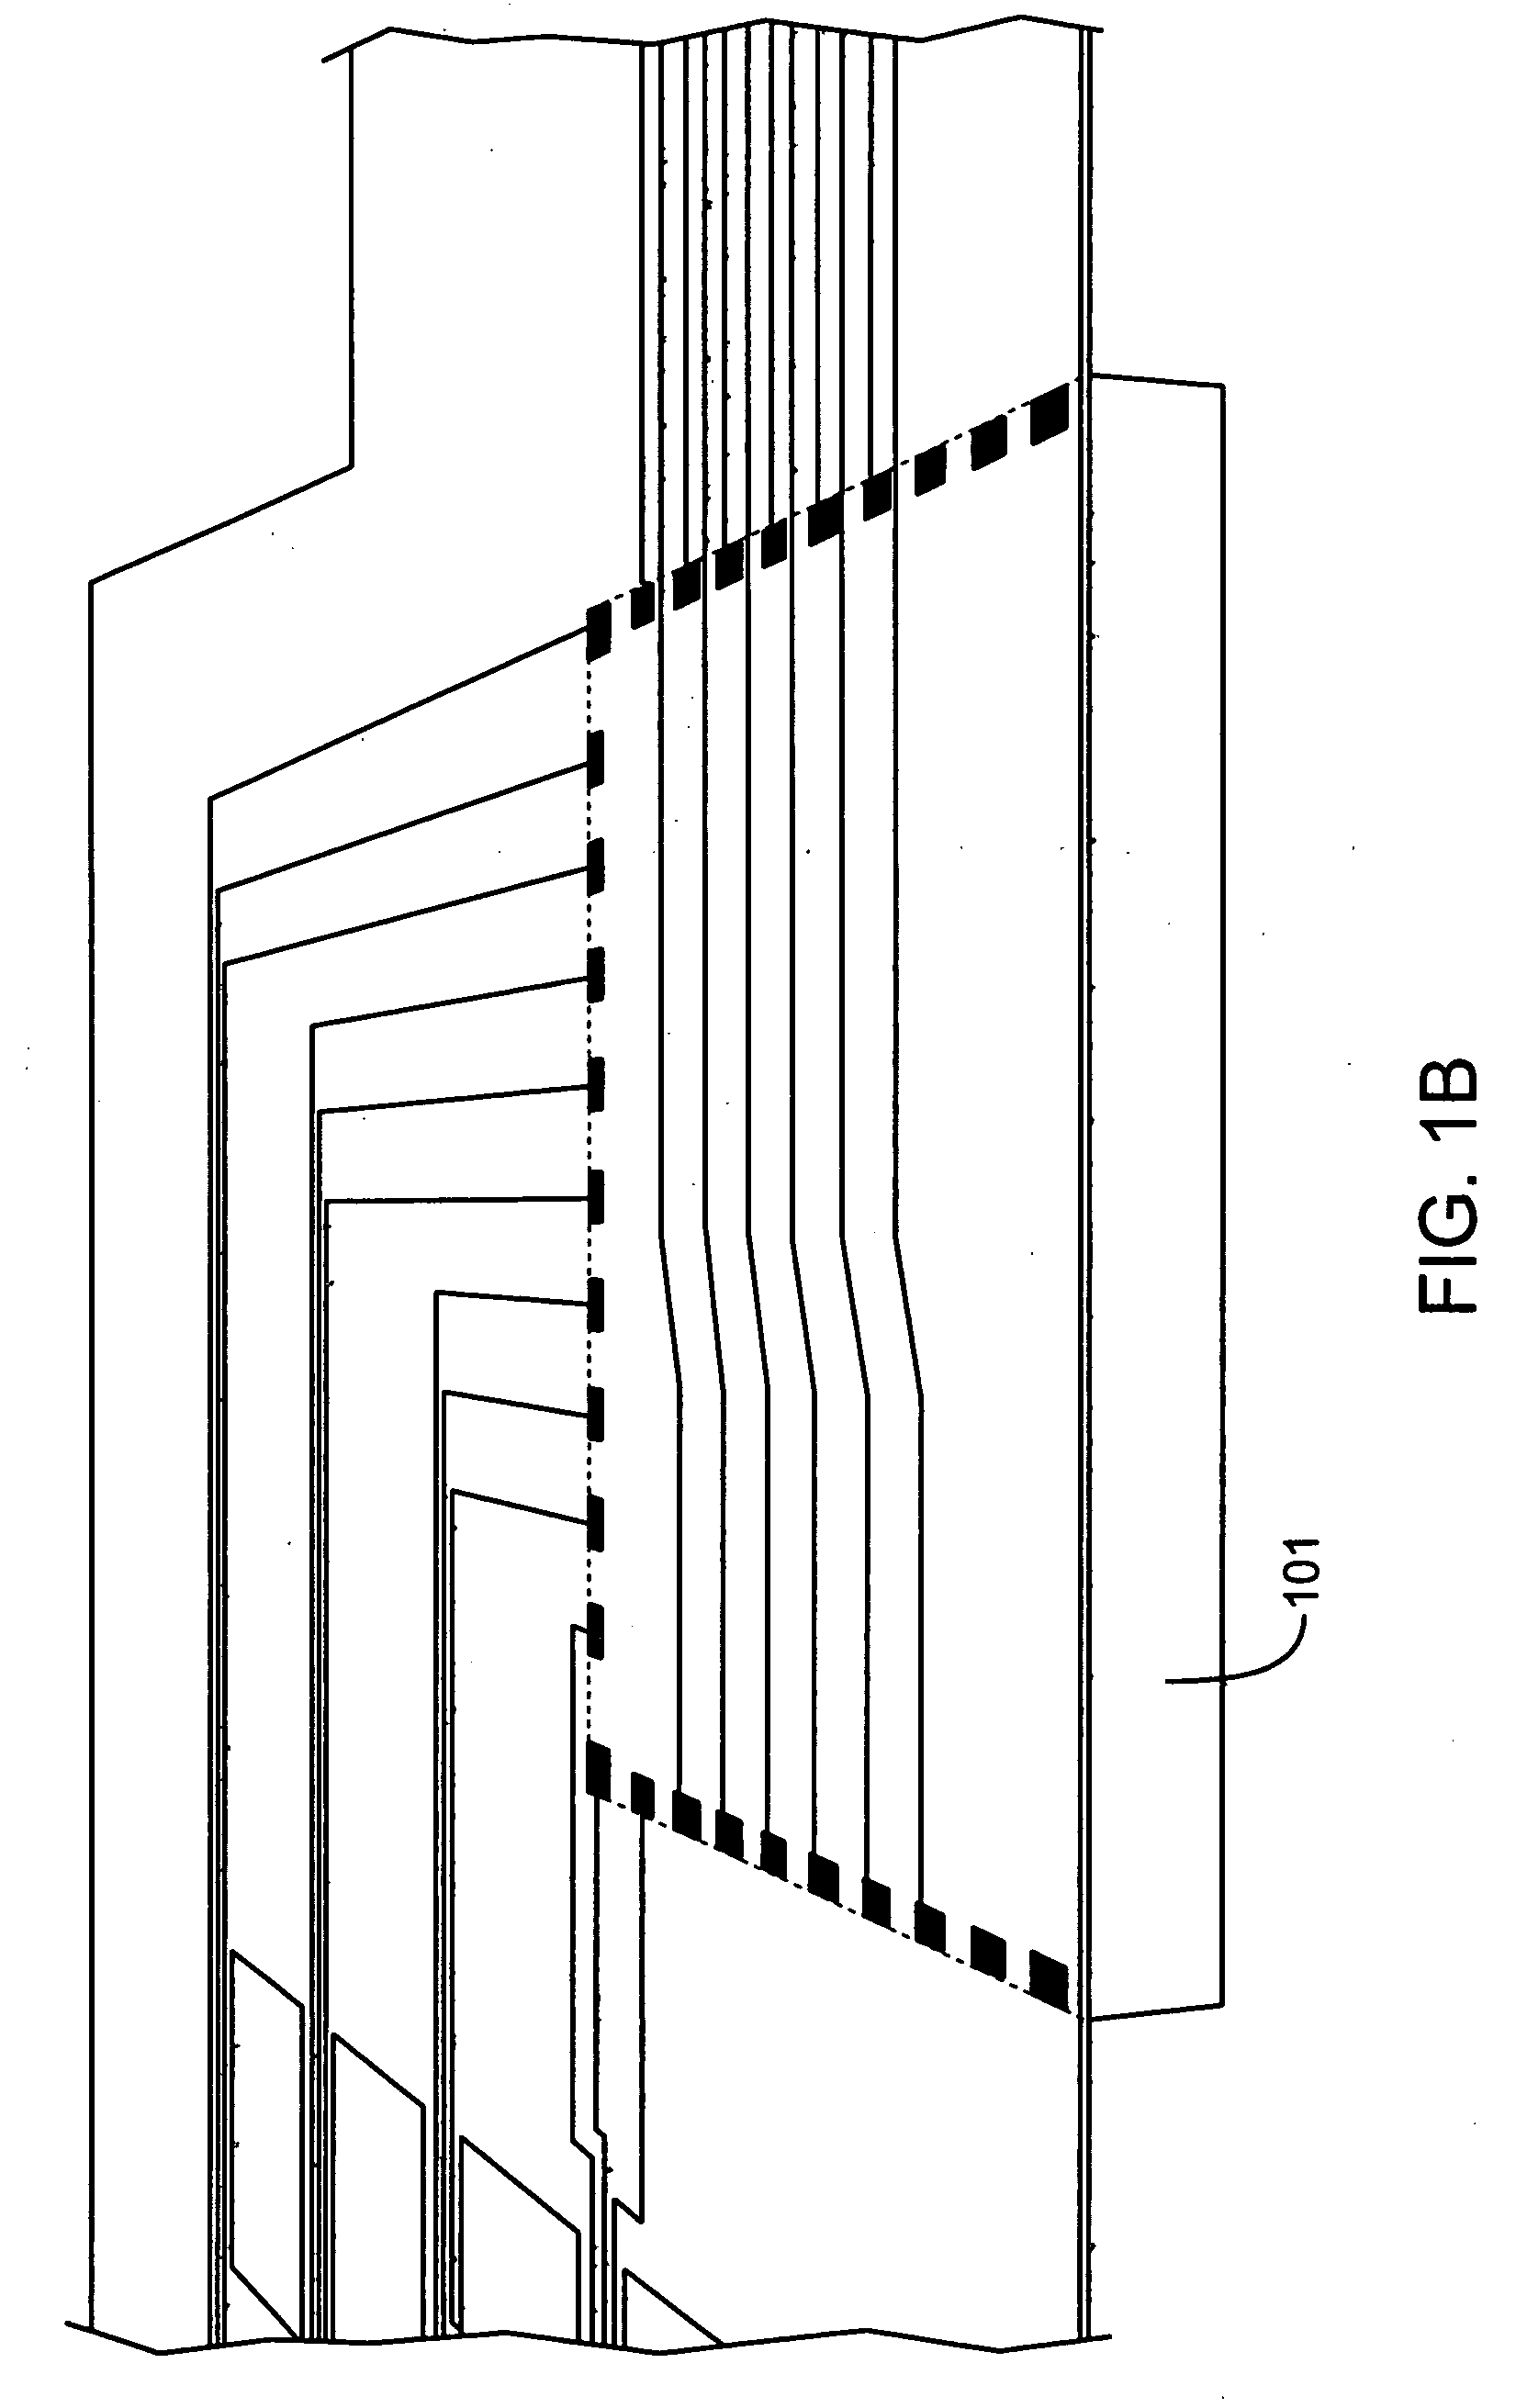 Method for integrating pre-fabricated chip structures into functional electronic systems